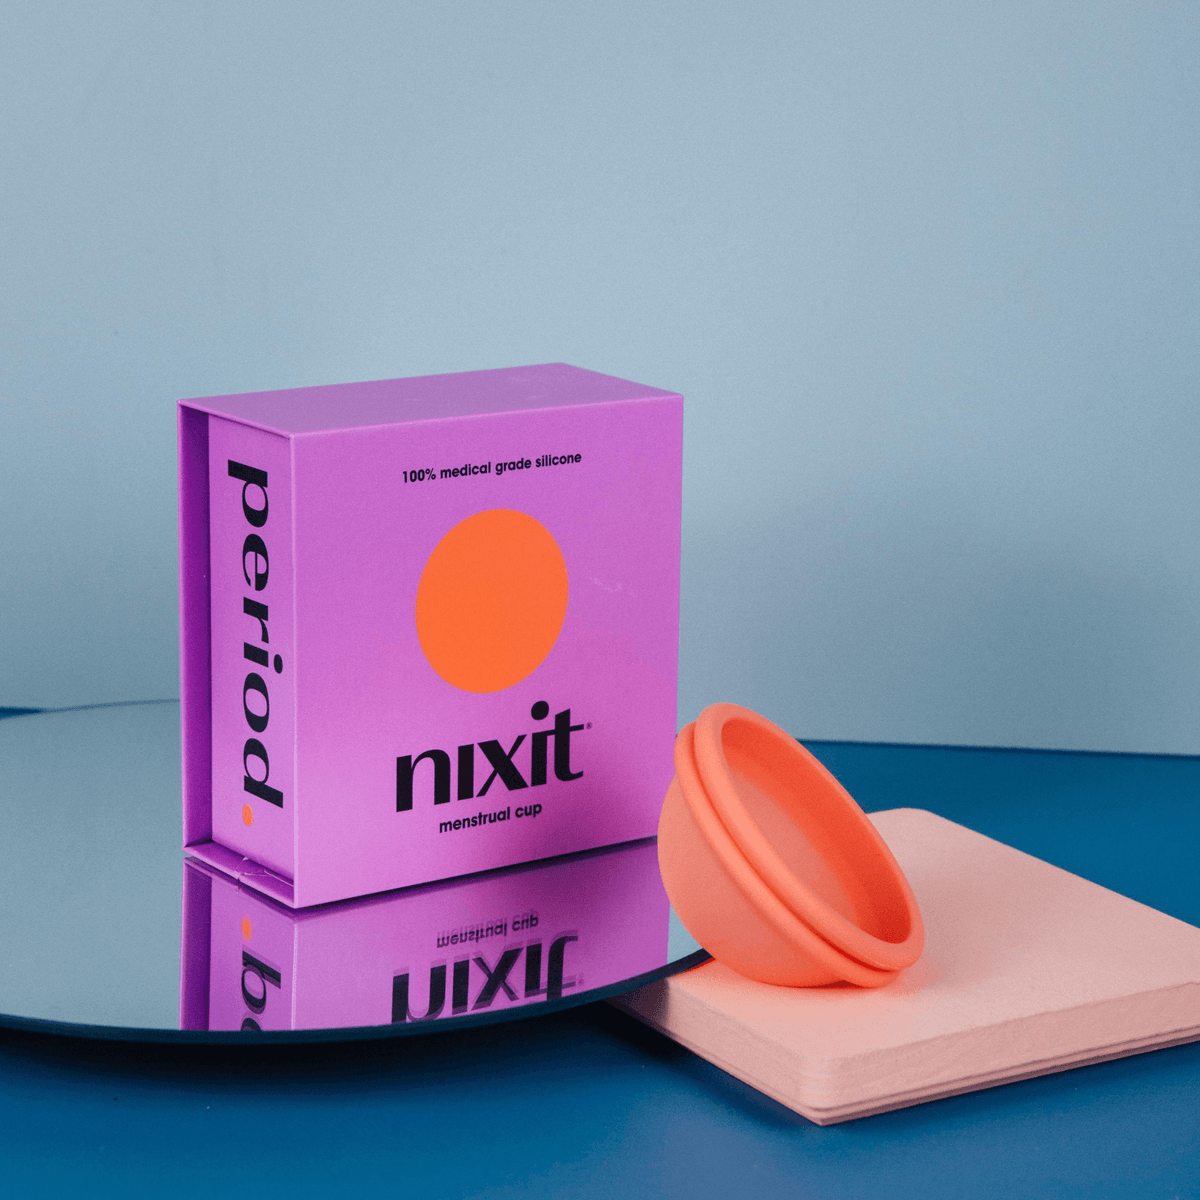 nixit menstrual cup on Instagram: Shoutout to anyone that's been